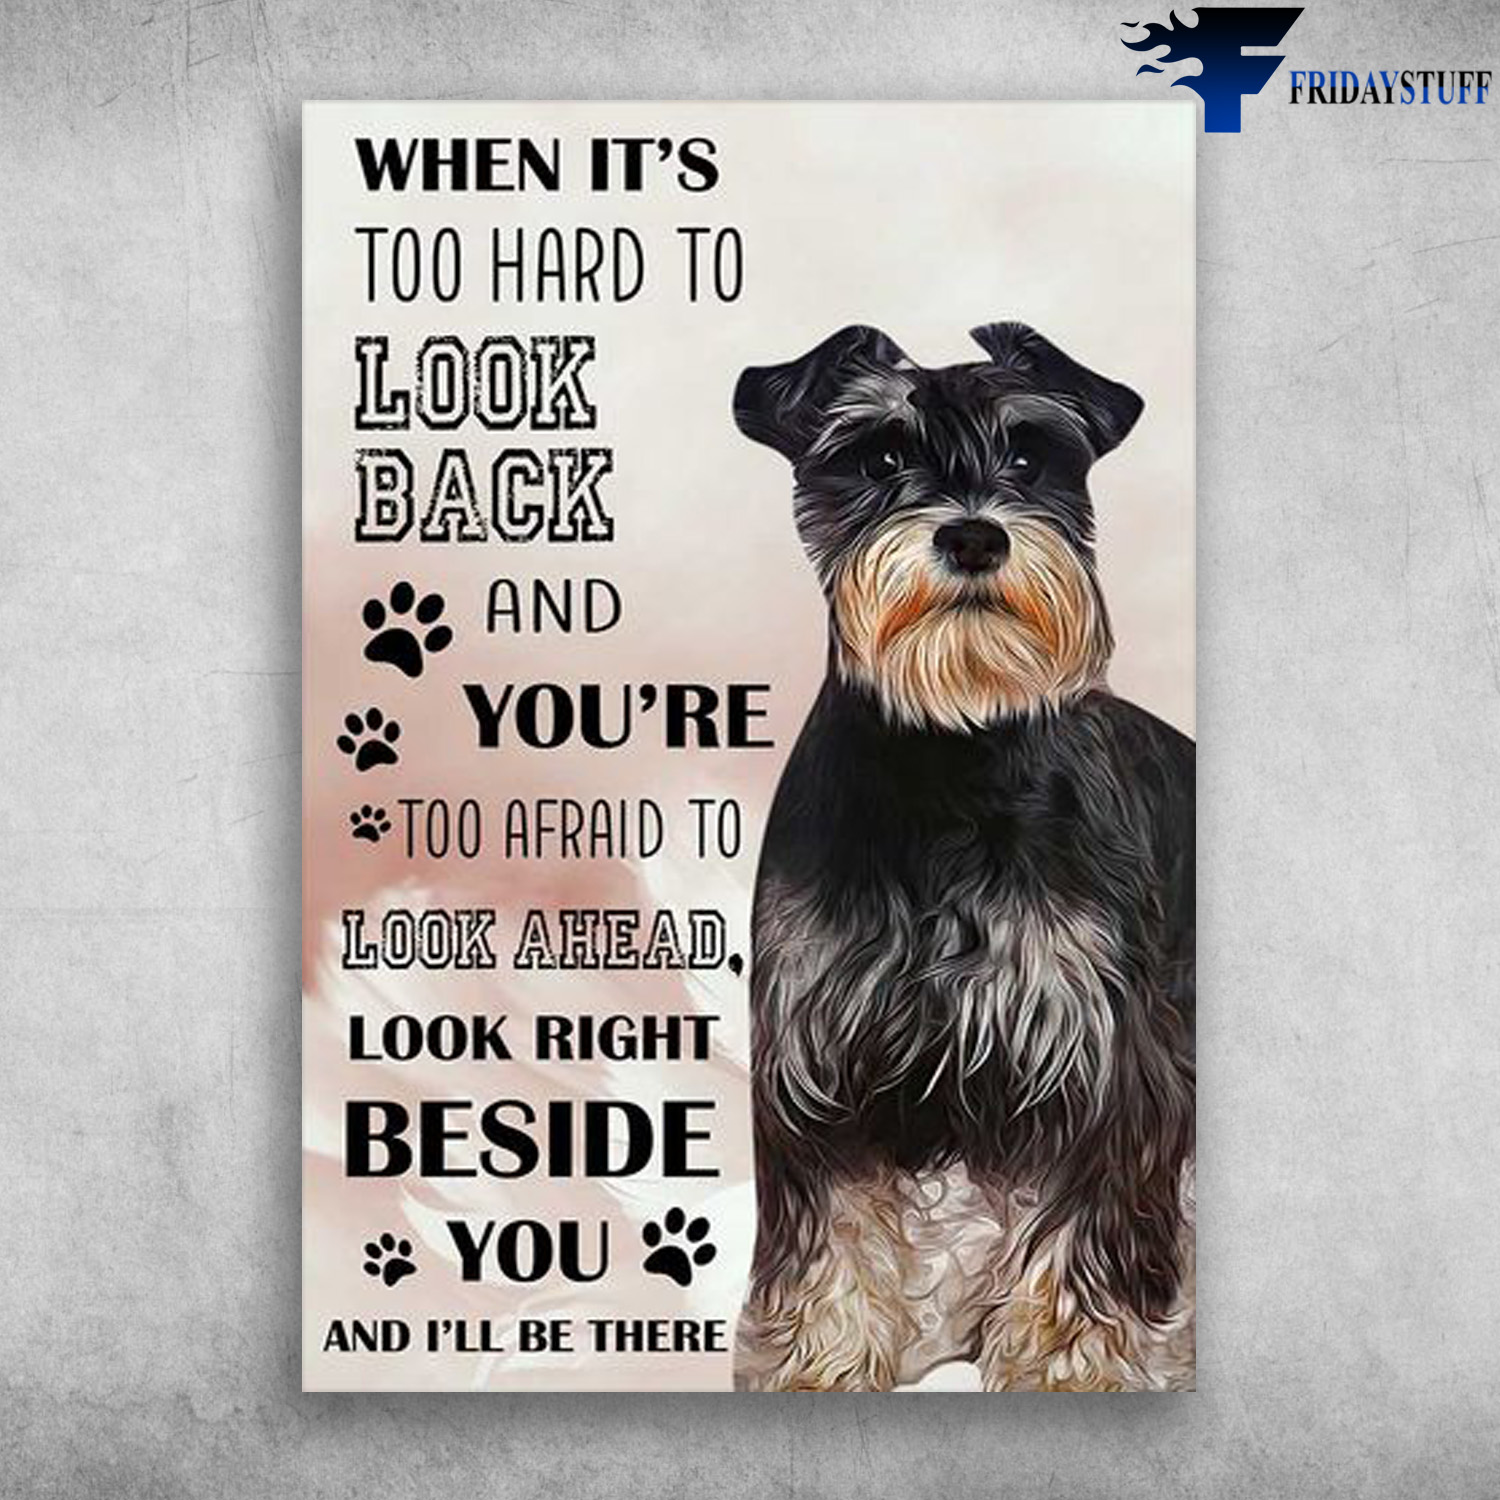 Schnauzer Dog - When It's Too Hard To Look Back, And You're Too Afraid To Look Ahead, Look Right Beside You, And I'll Be There